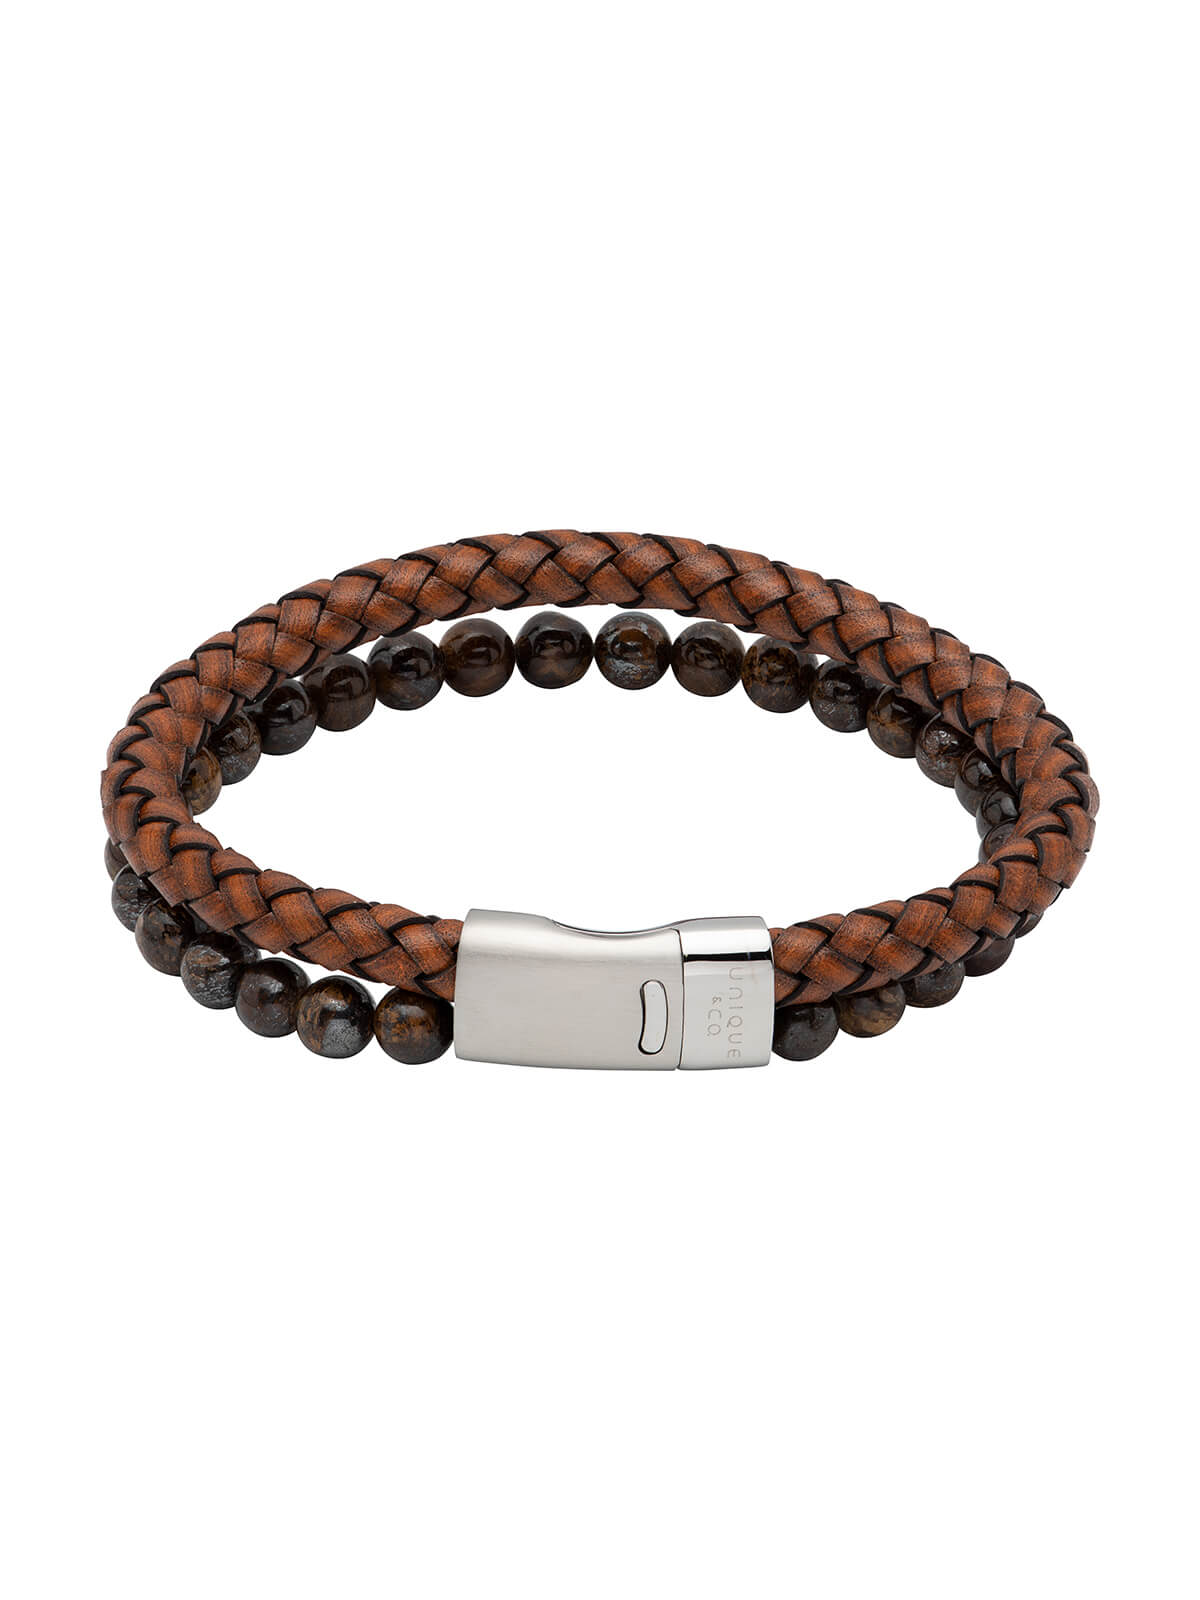 Unique & Co. 21cm Dark Brown Leather & Tiger's Eye Bead Bracelet with Steel Clasp